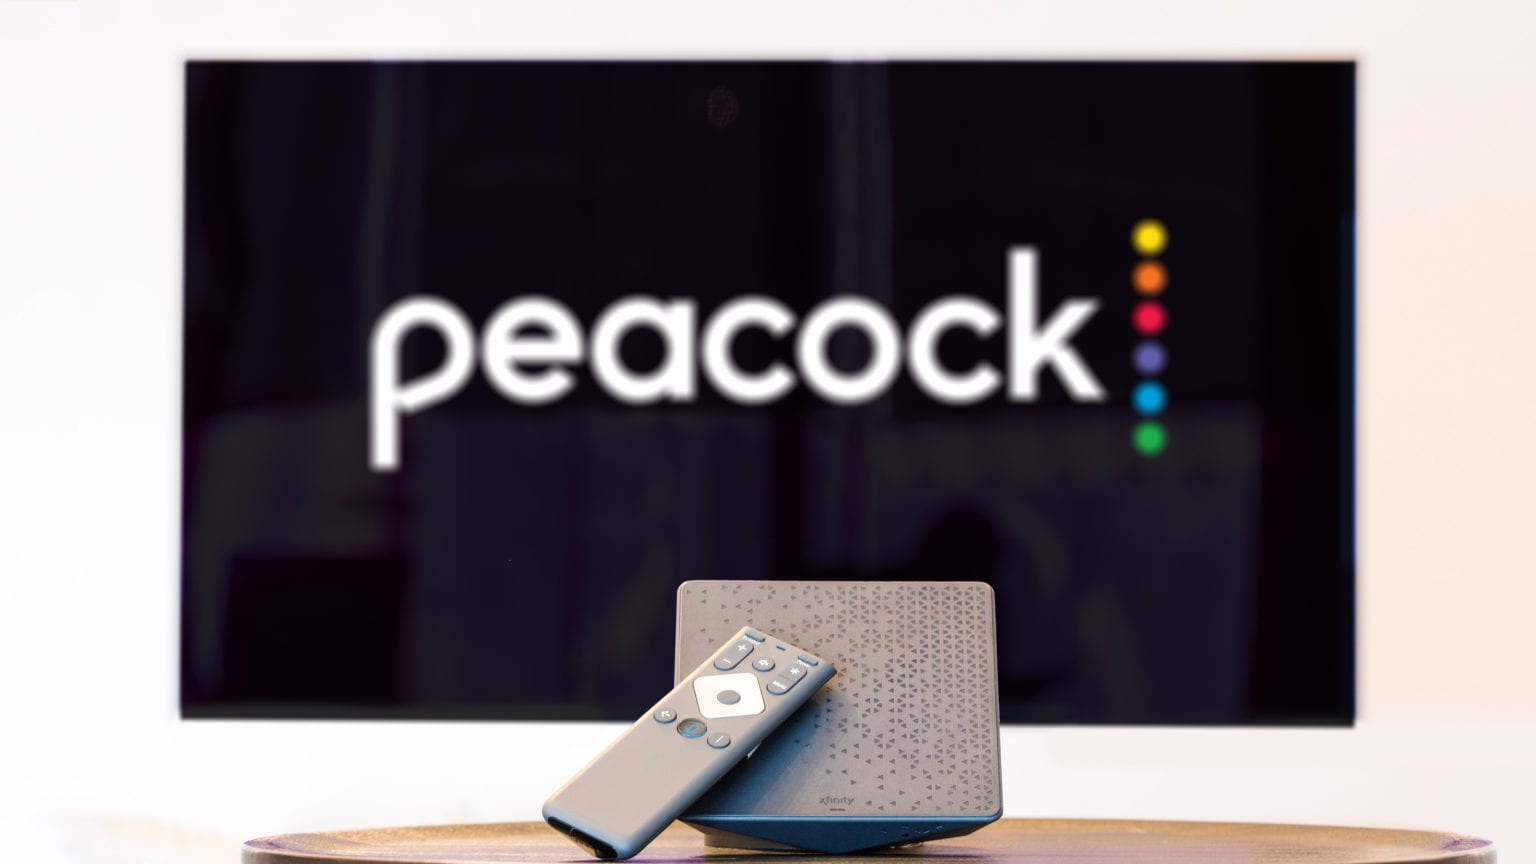 Enjoy Peacock at No Additional Cost with Xfinity